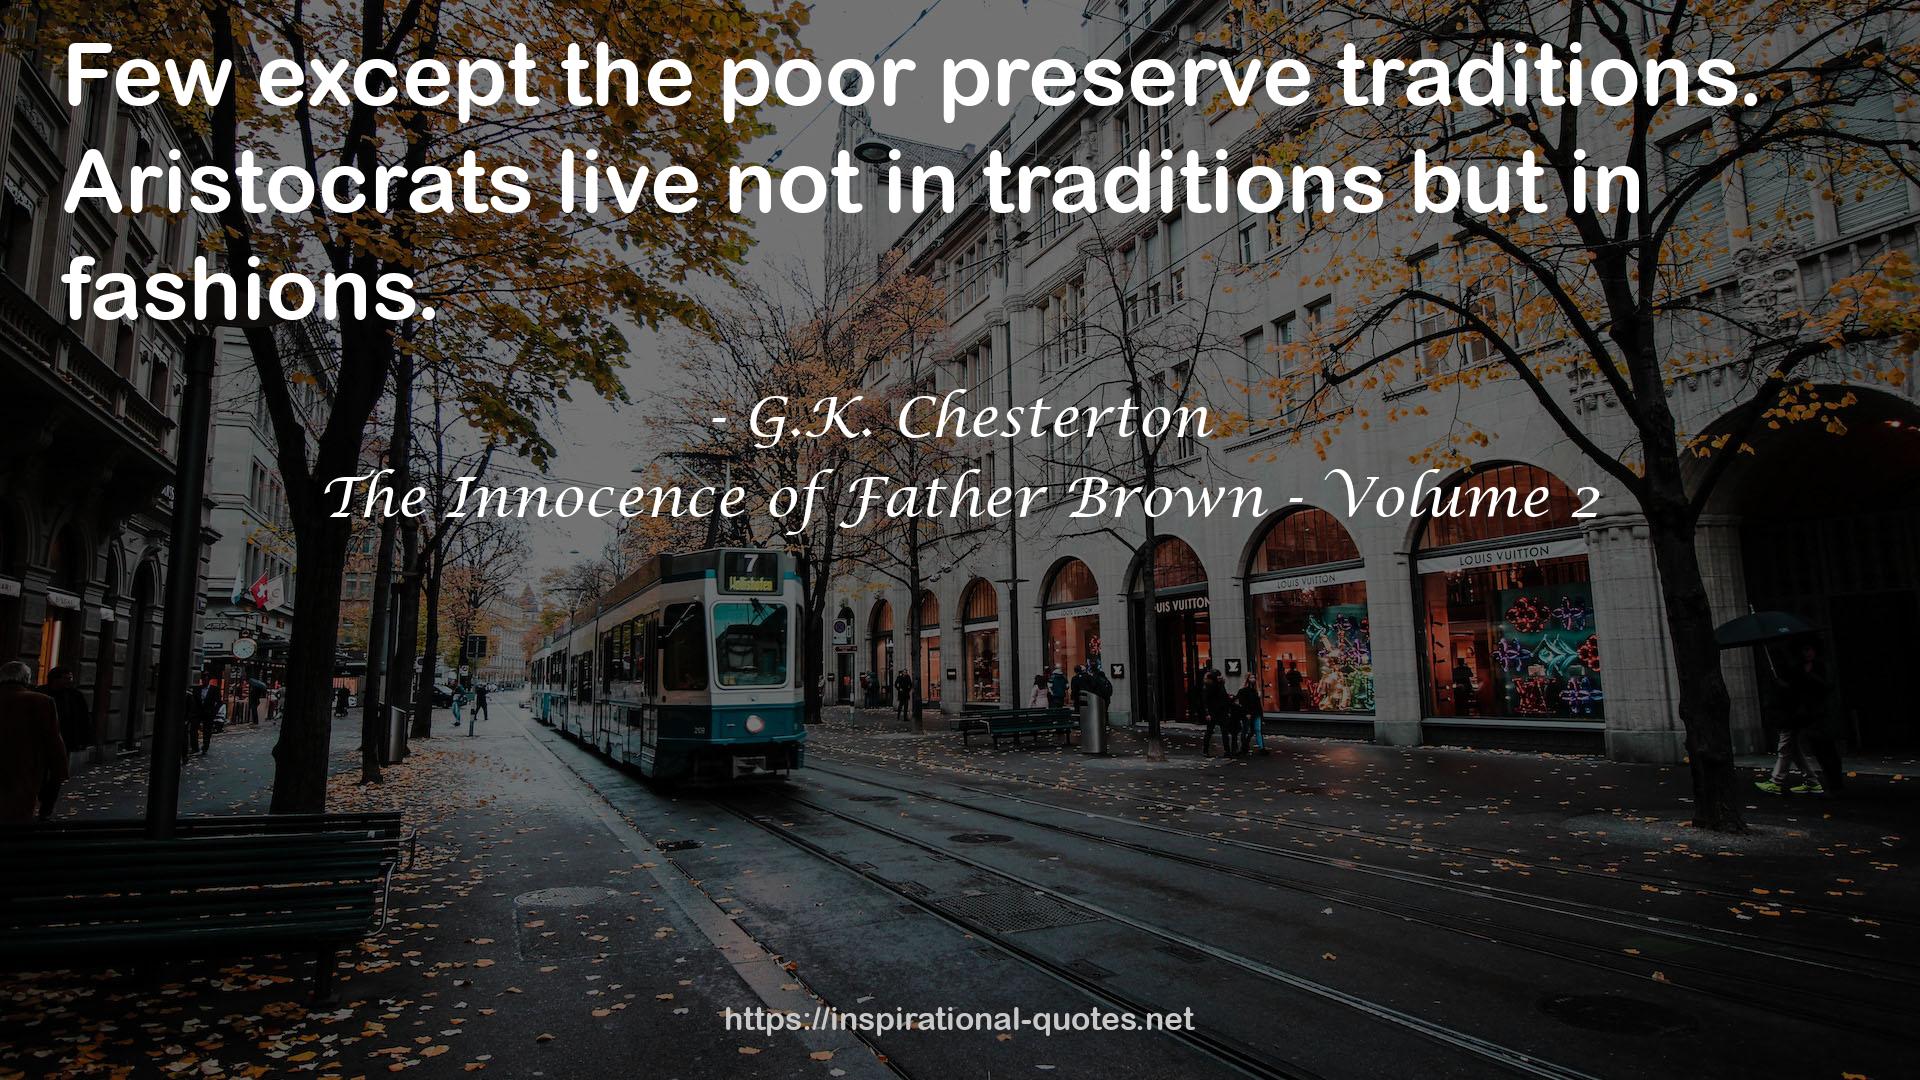 The Innocence of Father Brown - Volume 2 QUOTES